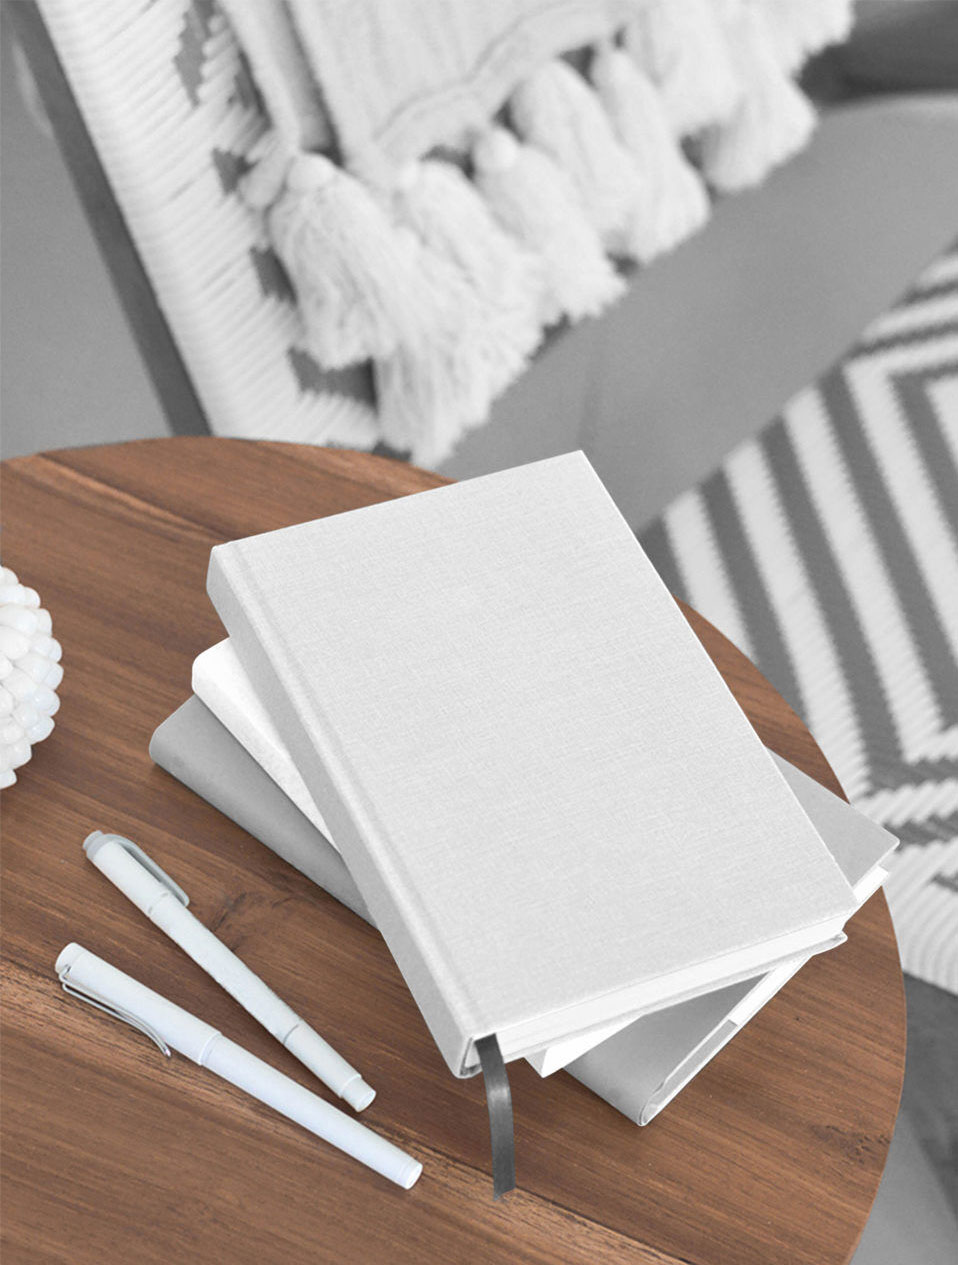 Mockup Featuring Three Hardcover Books on Wooden Table FREE PSD